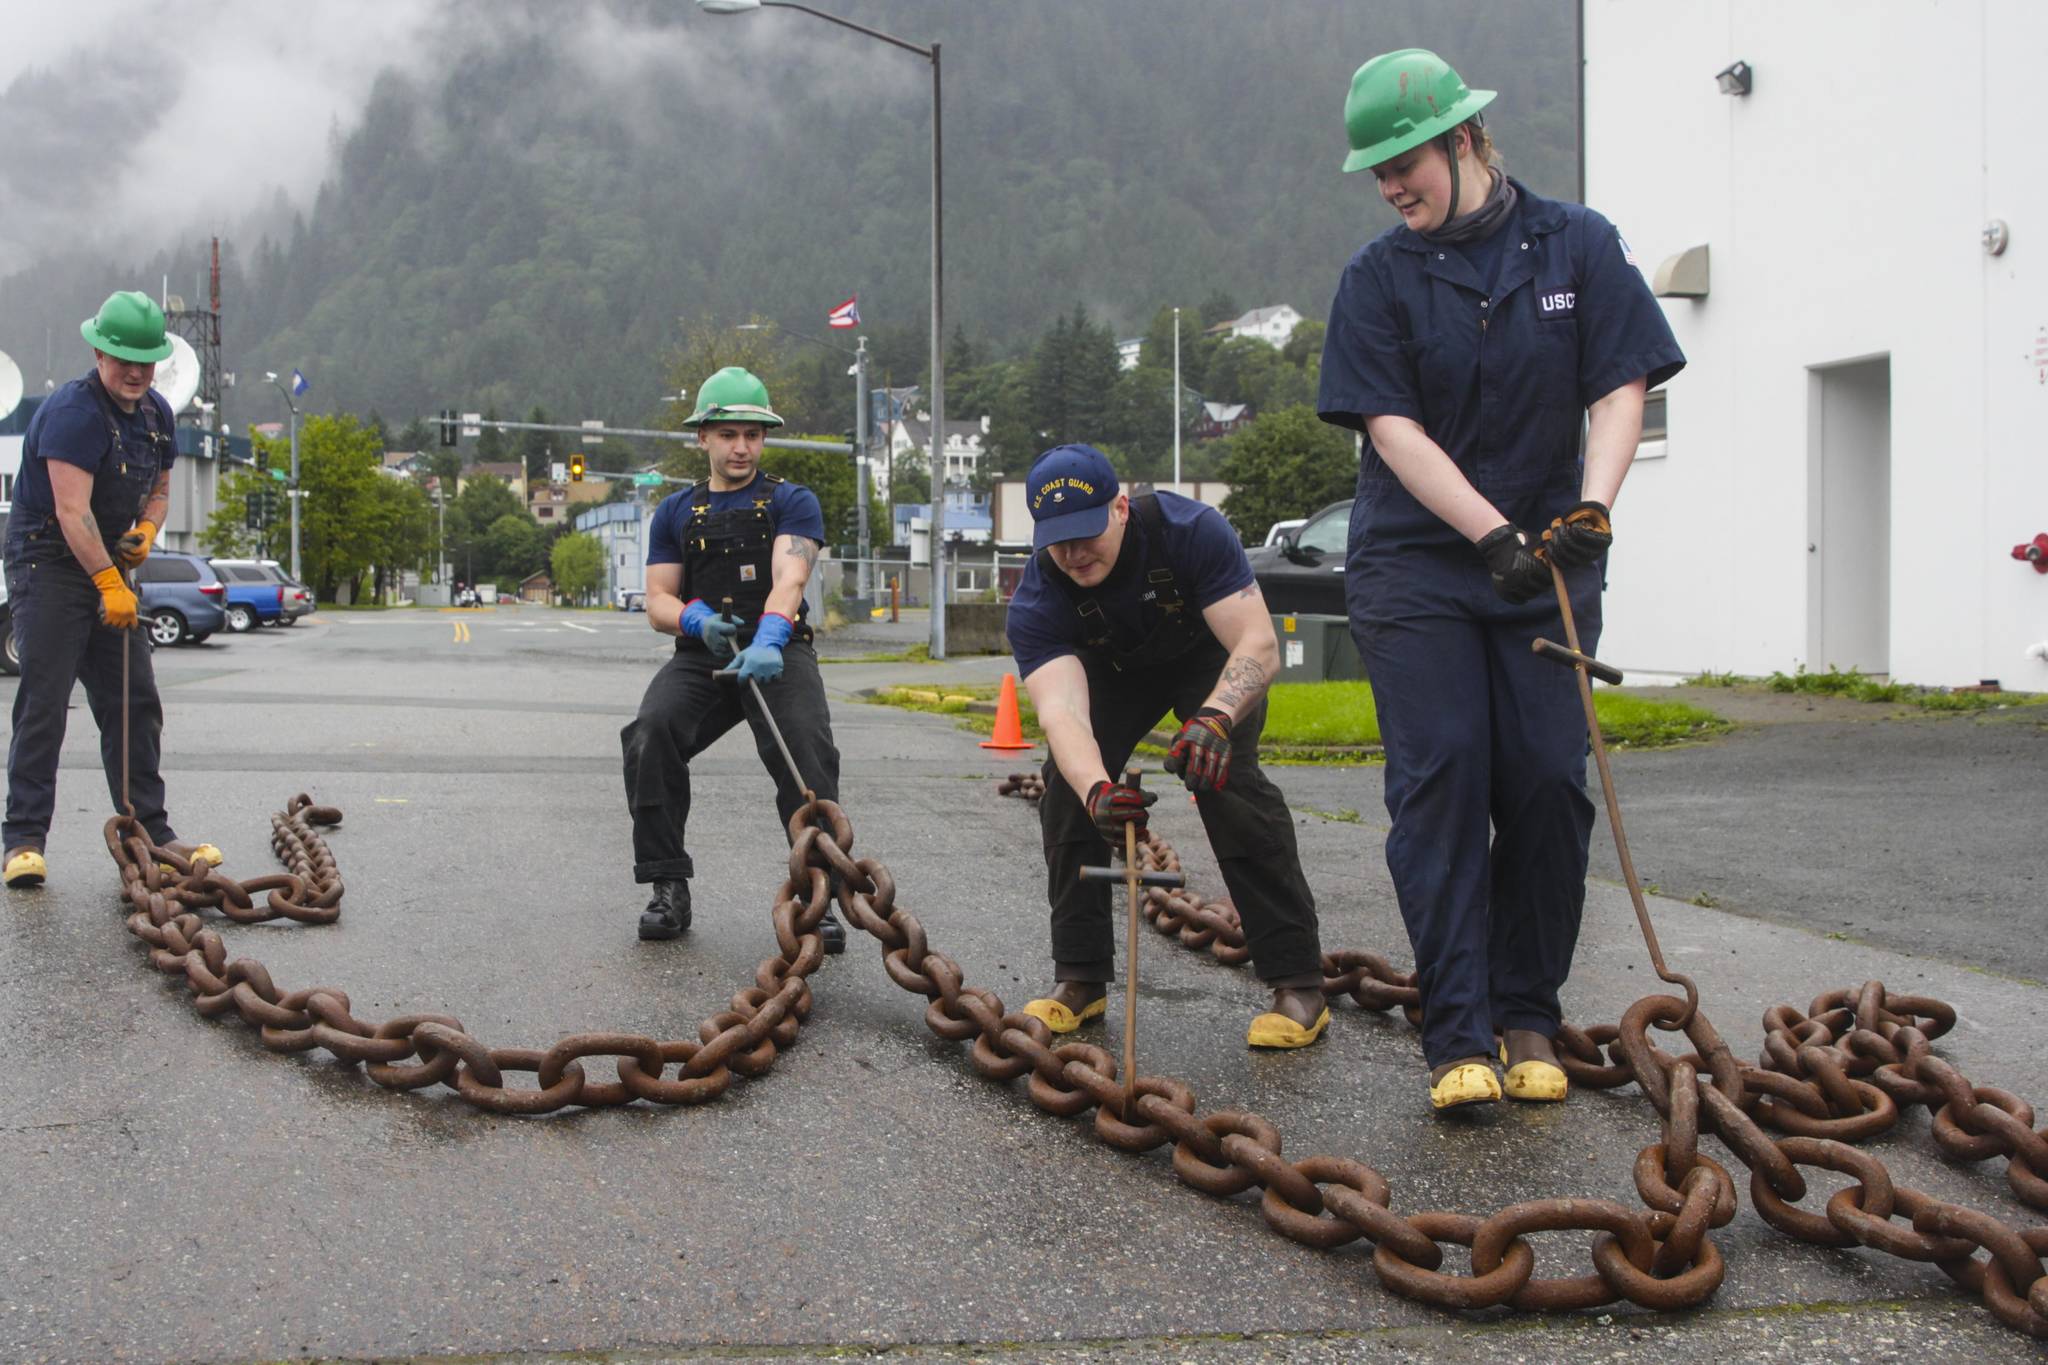 Coast Guardsmen compete in the chain drag, one of the inter-vessel competitions during this year’s Buoy Tender Roundup at Sector Juneau, on Wednesday, Aug. 25, 2021. (Michael S. Lockett / Juneau Empire)